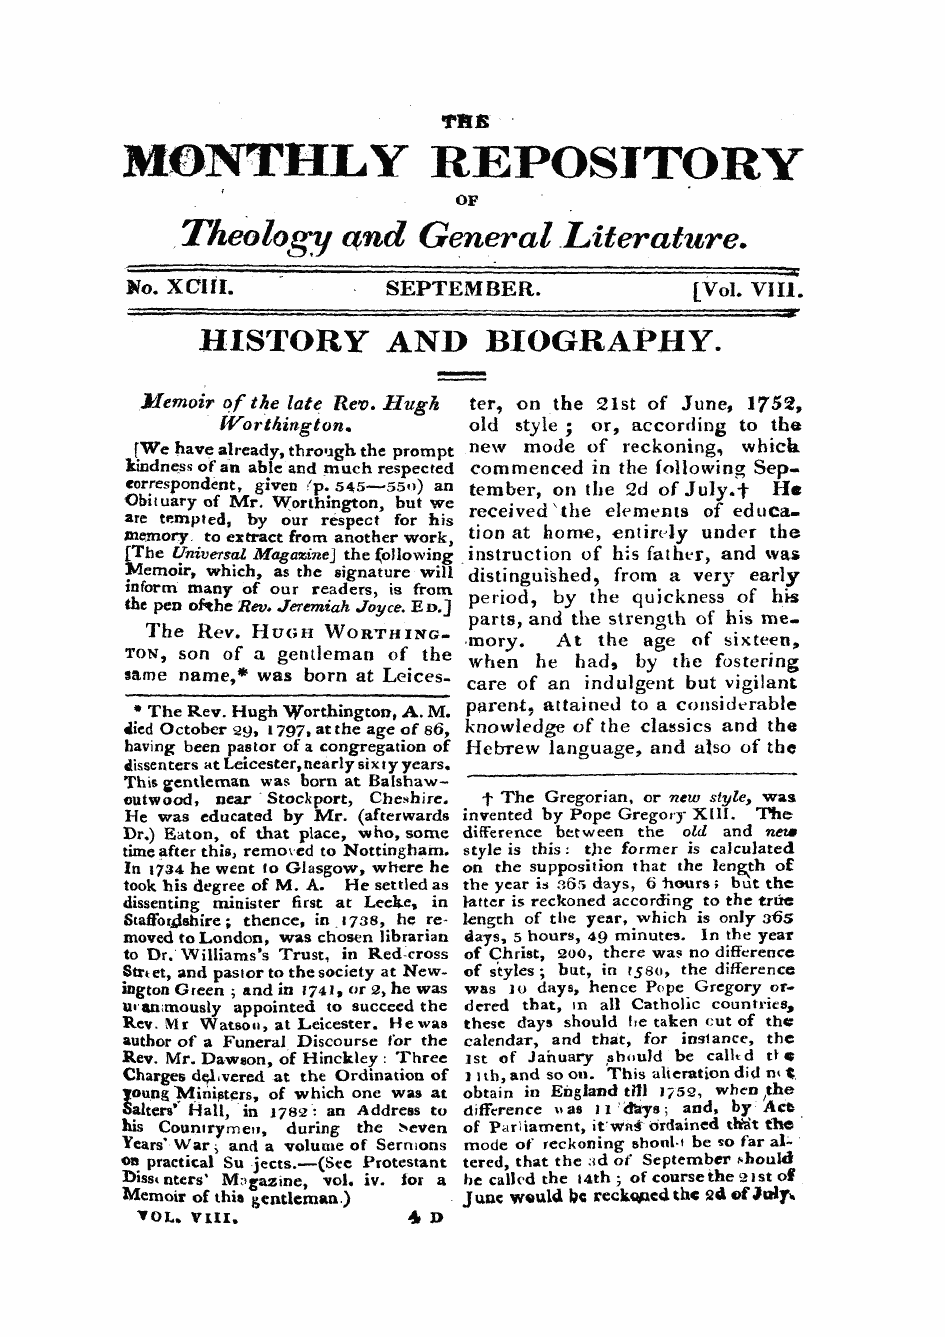 Monthly Repository (1806-1838) and Unitarian Chronicle (1832-1833): F Y, 1st edition - History And Biography.